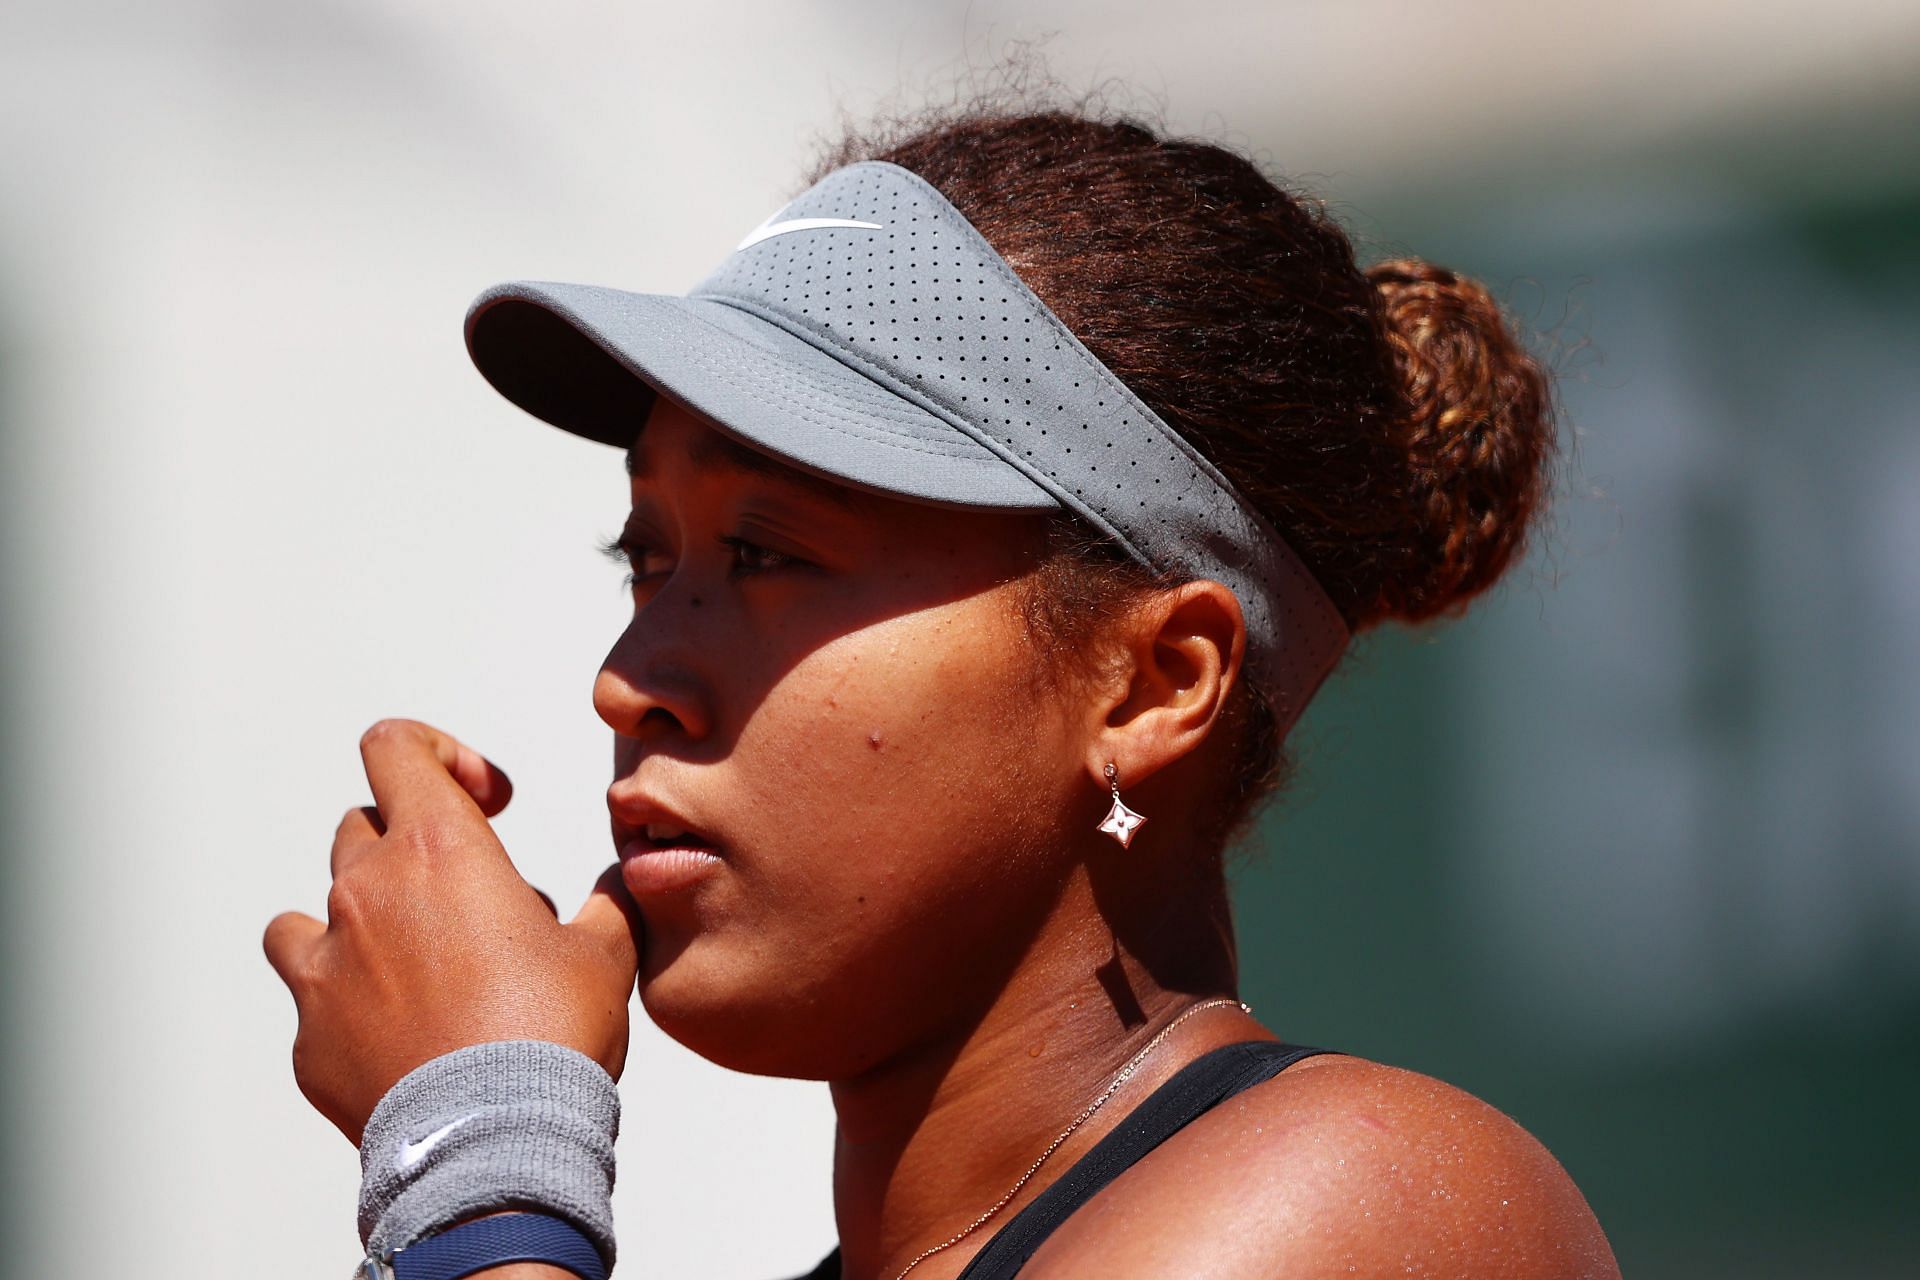 Naomi Osaka has been speaking up about her mental health issues